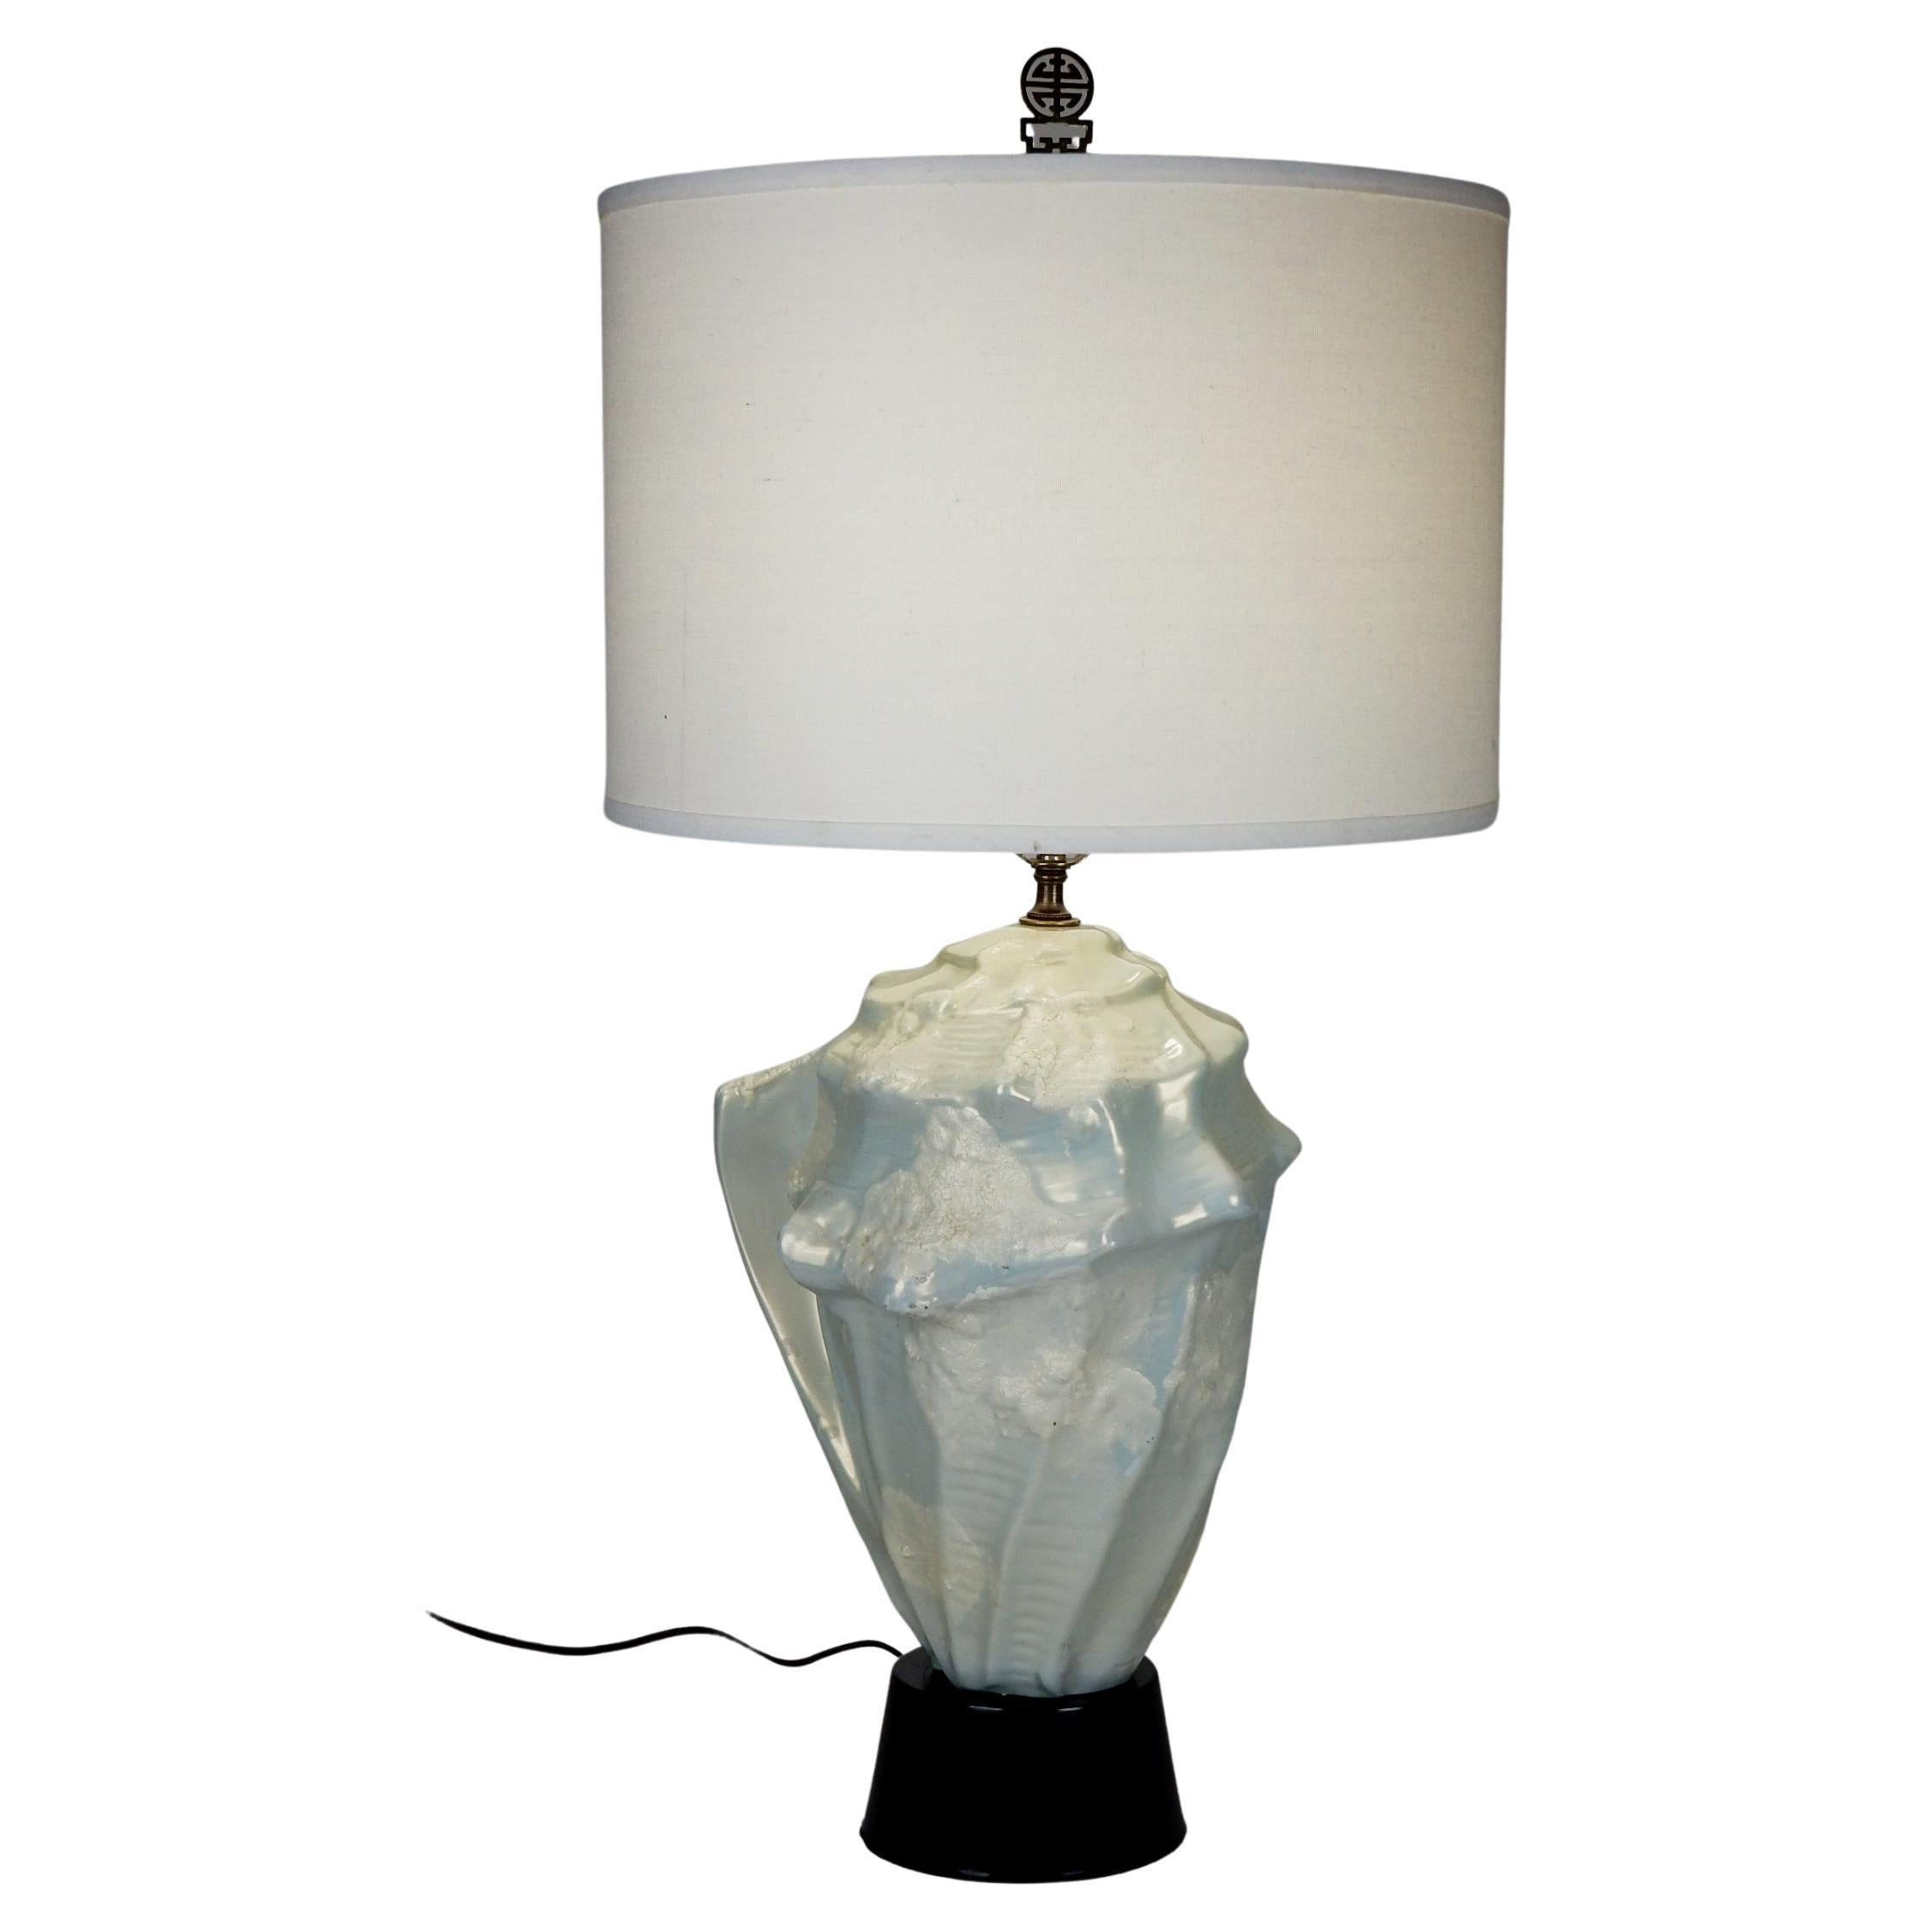 Vintage 1960s Faux Conch Shell Ceramic Table Lamp For Sale